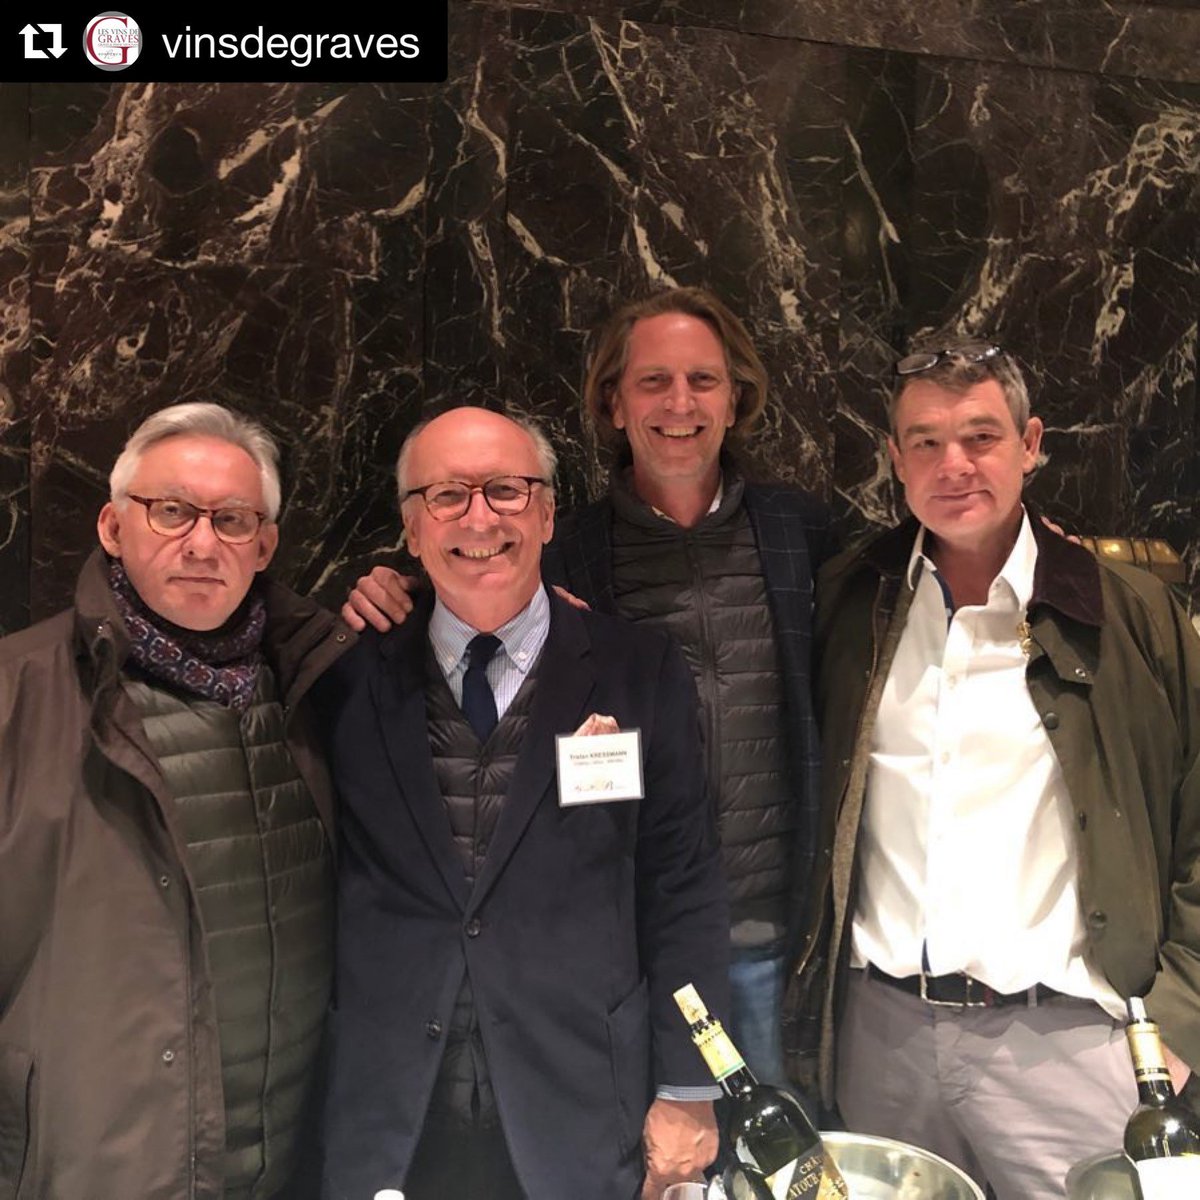 Latour-Martillac in New York with @MalarticLagrav, @chateauolivier & @Chateau_LHB ! #wine #bordeaux #bordeauxwine #pessacleognan @ugcbnet @crus_classes